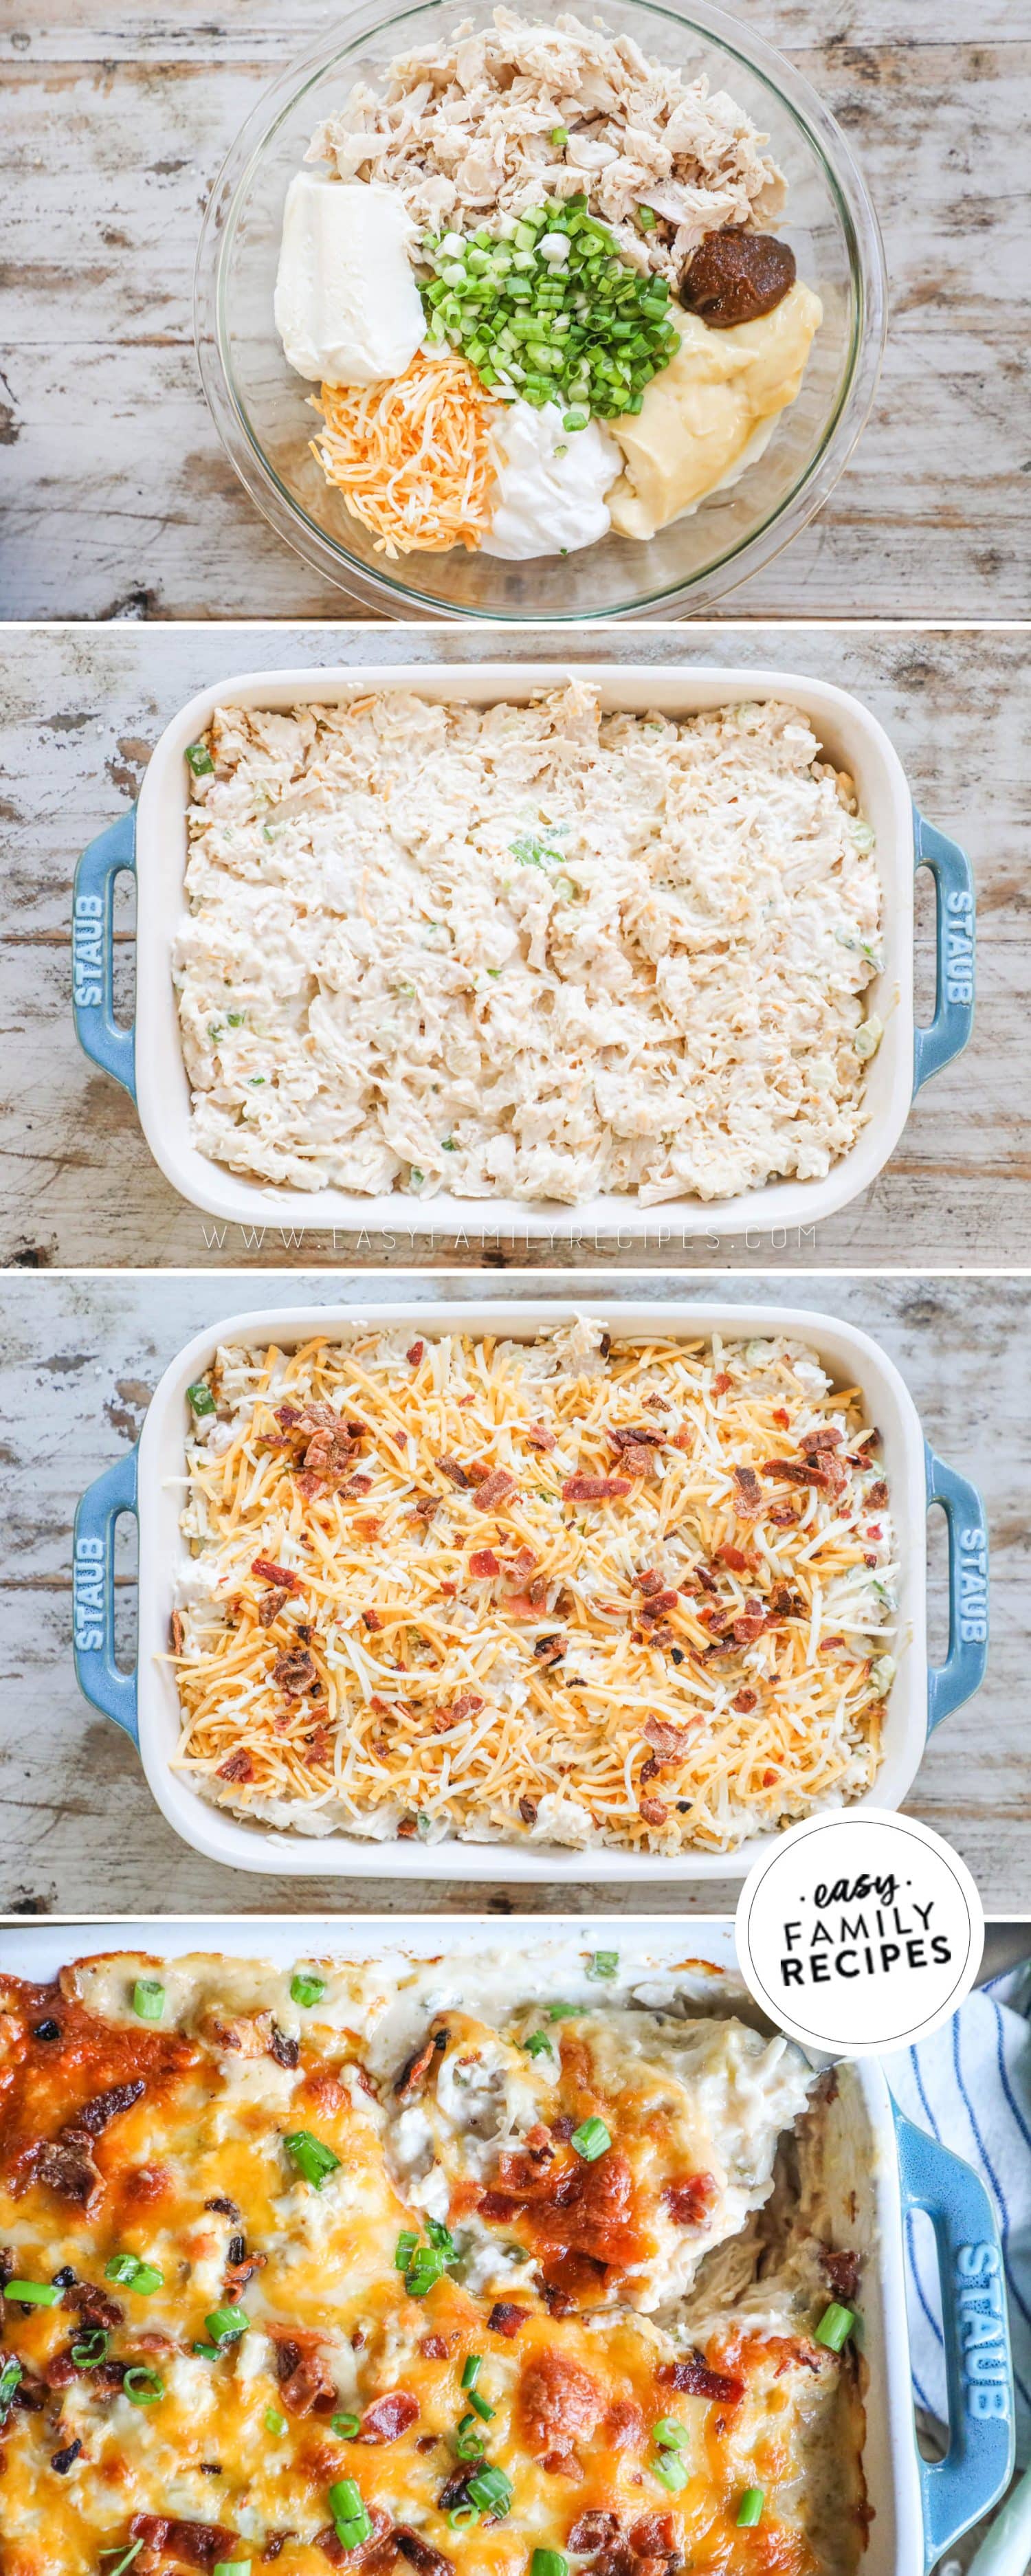 4 image vertical collage making and serving recipe: 1- filling ingredients in bowl before mixed, 2- filling added to casserole dish after mixed, 3- casserole topped with shredded cheese and bacon, 4- serving spoon scooping up some of the baked casserole.